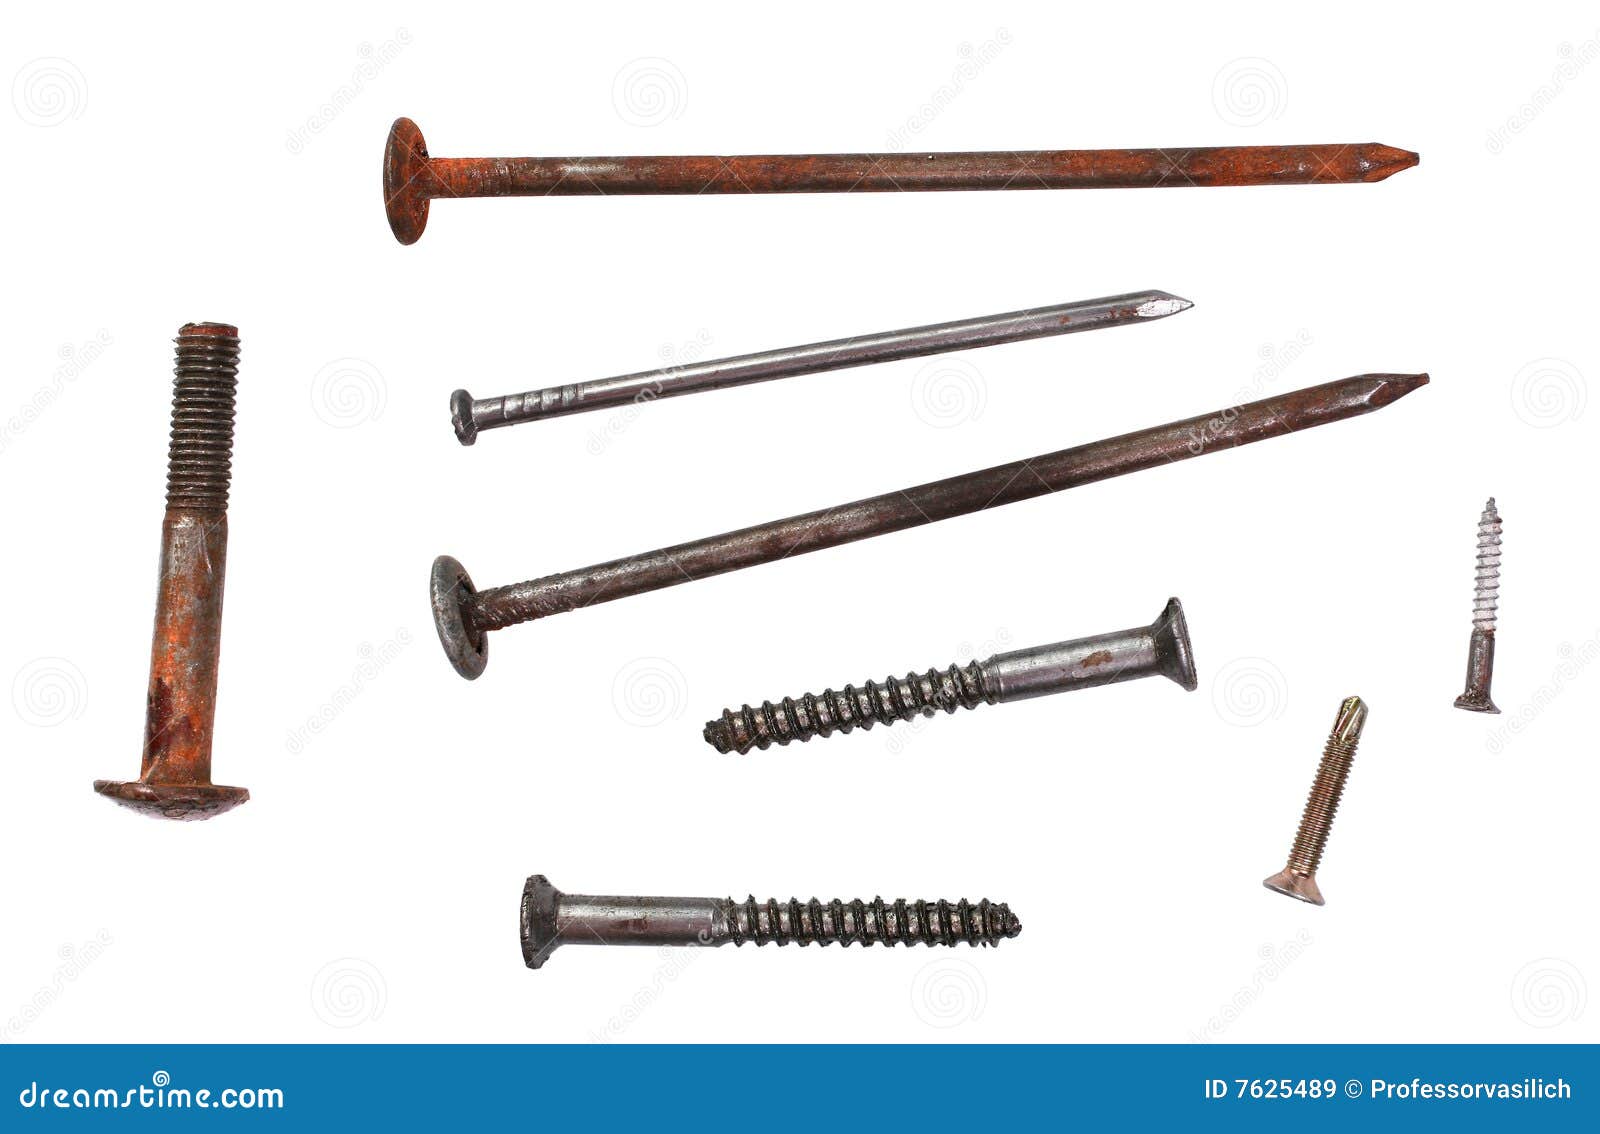 clipart of screws and nails - photo #33